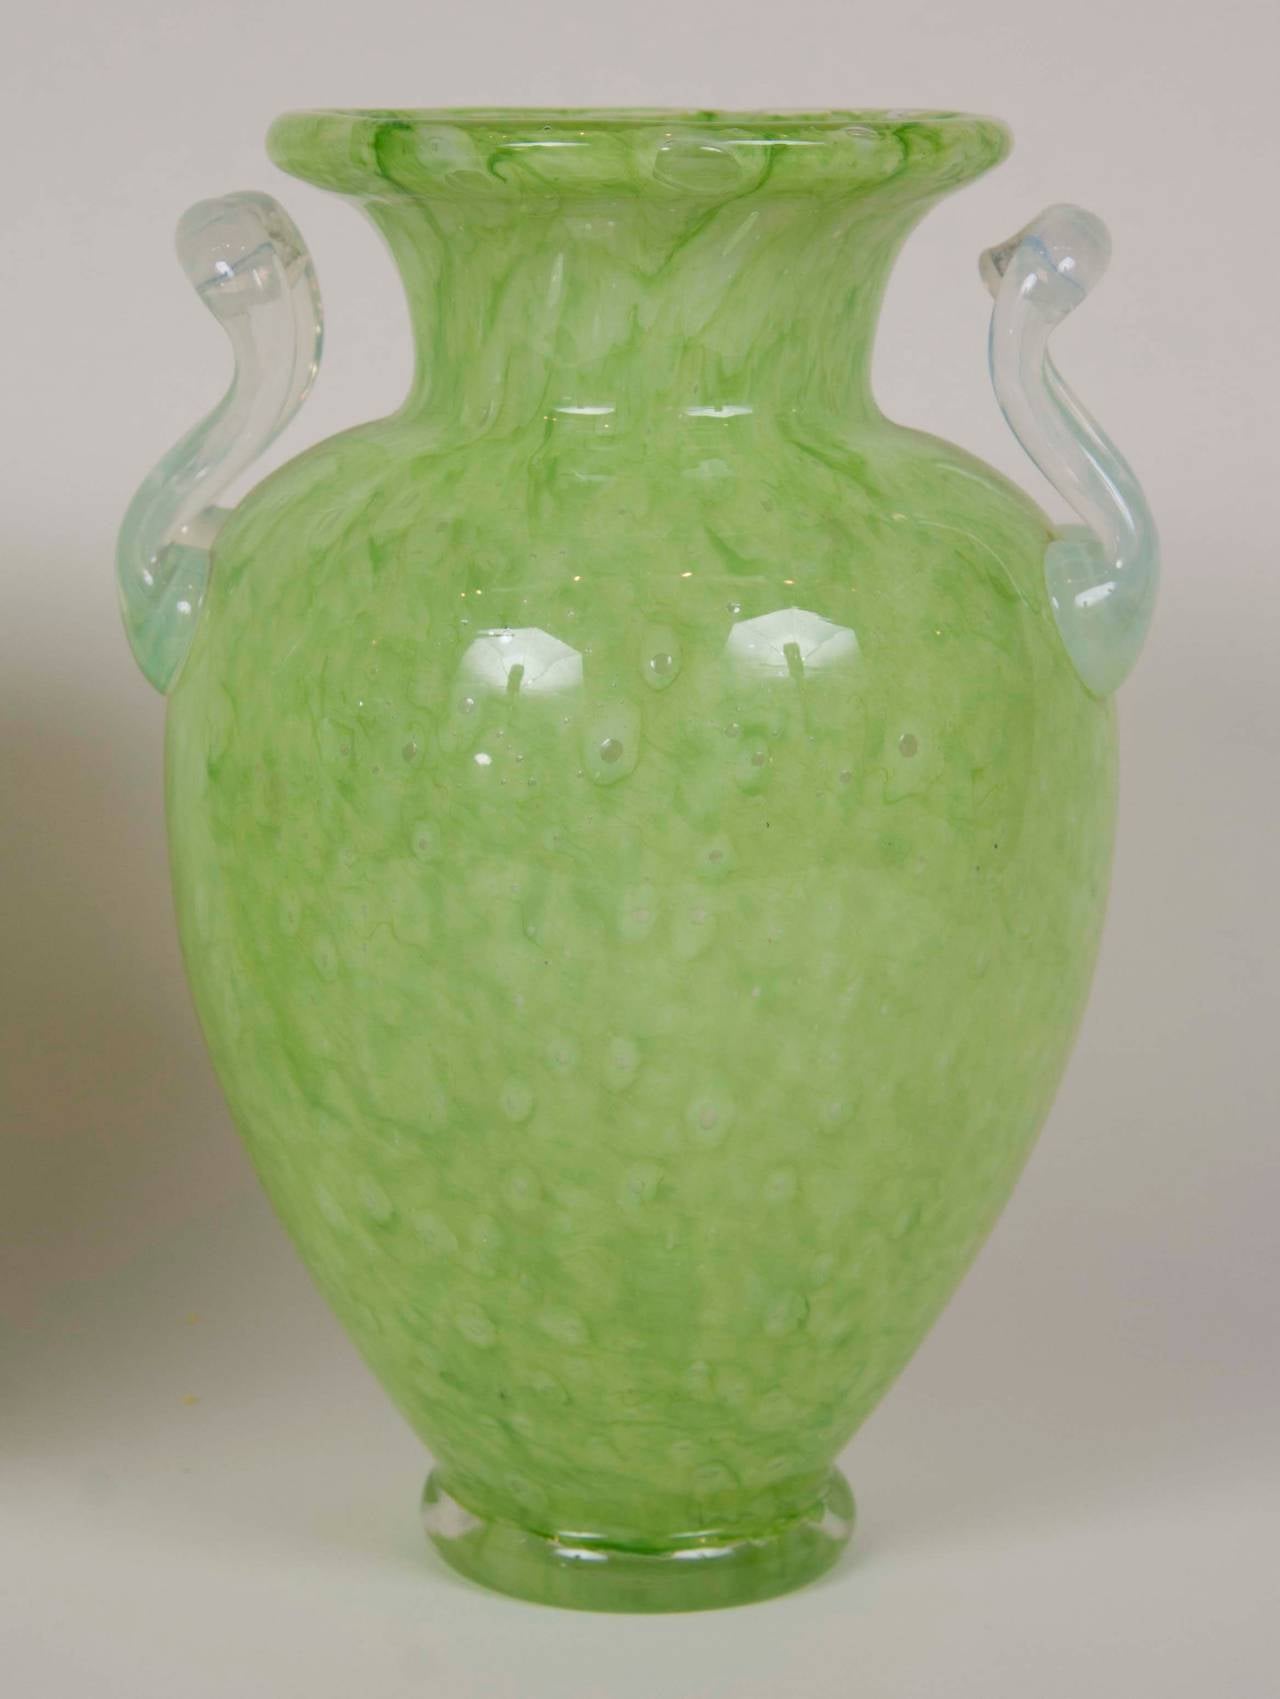 A pair of Steuben green cluthra glass vases with opaque handles by Frederick Carder.